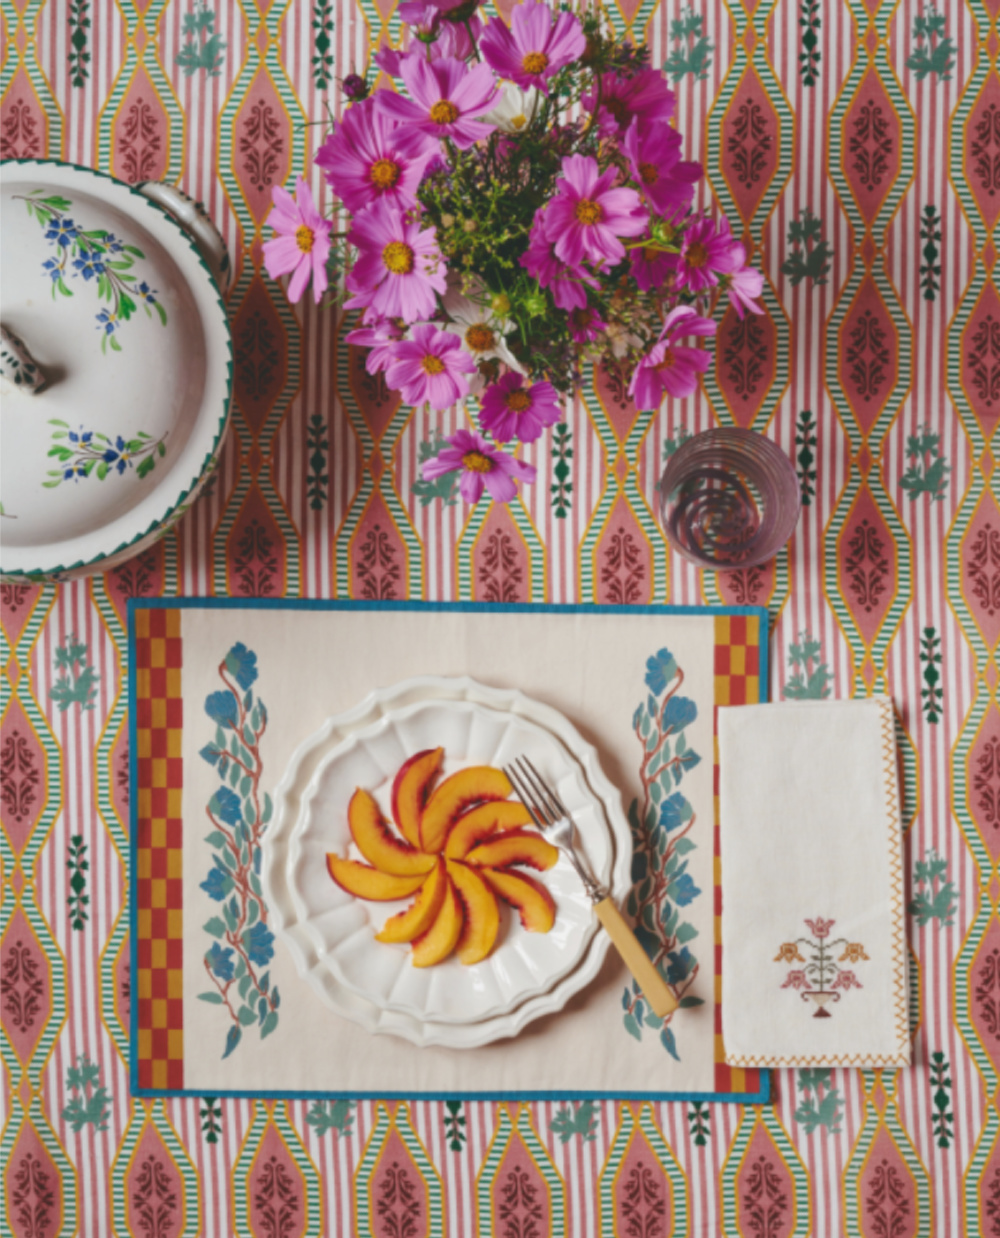 Vivid colorful Rosa Tableccloth (Casa Cabana) and beautiful tablescape with flowers and peaches on a plate - Martina Mondadori. #tablescapes #colorfultablecloth